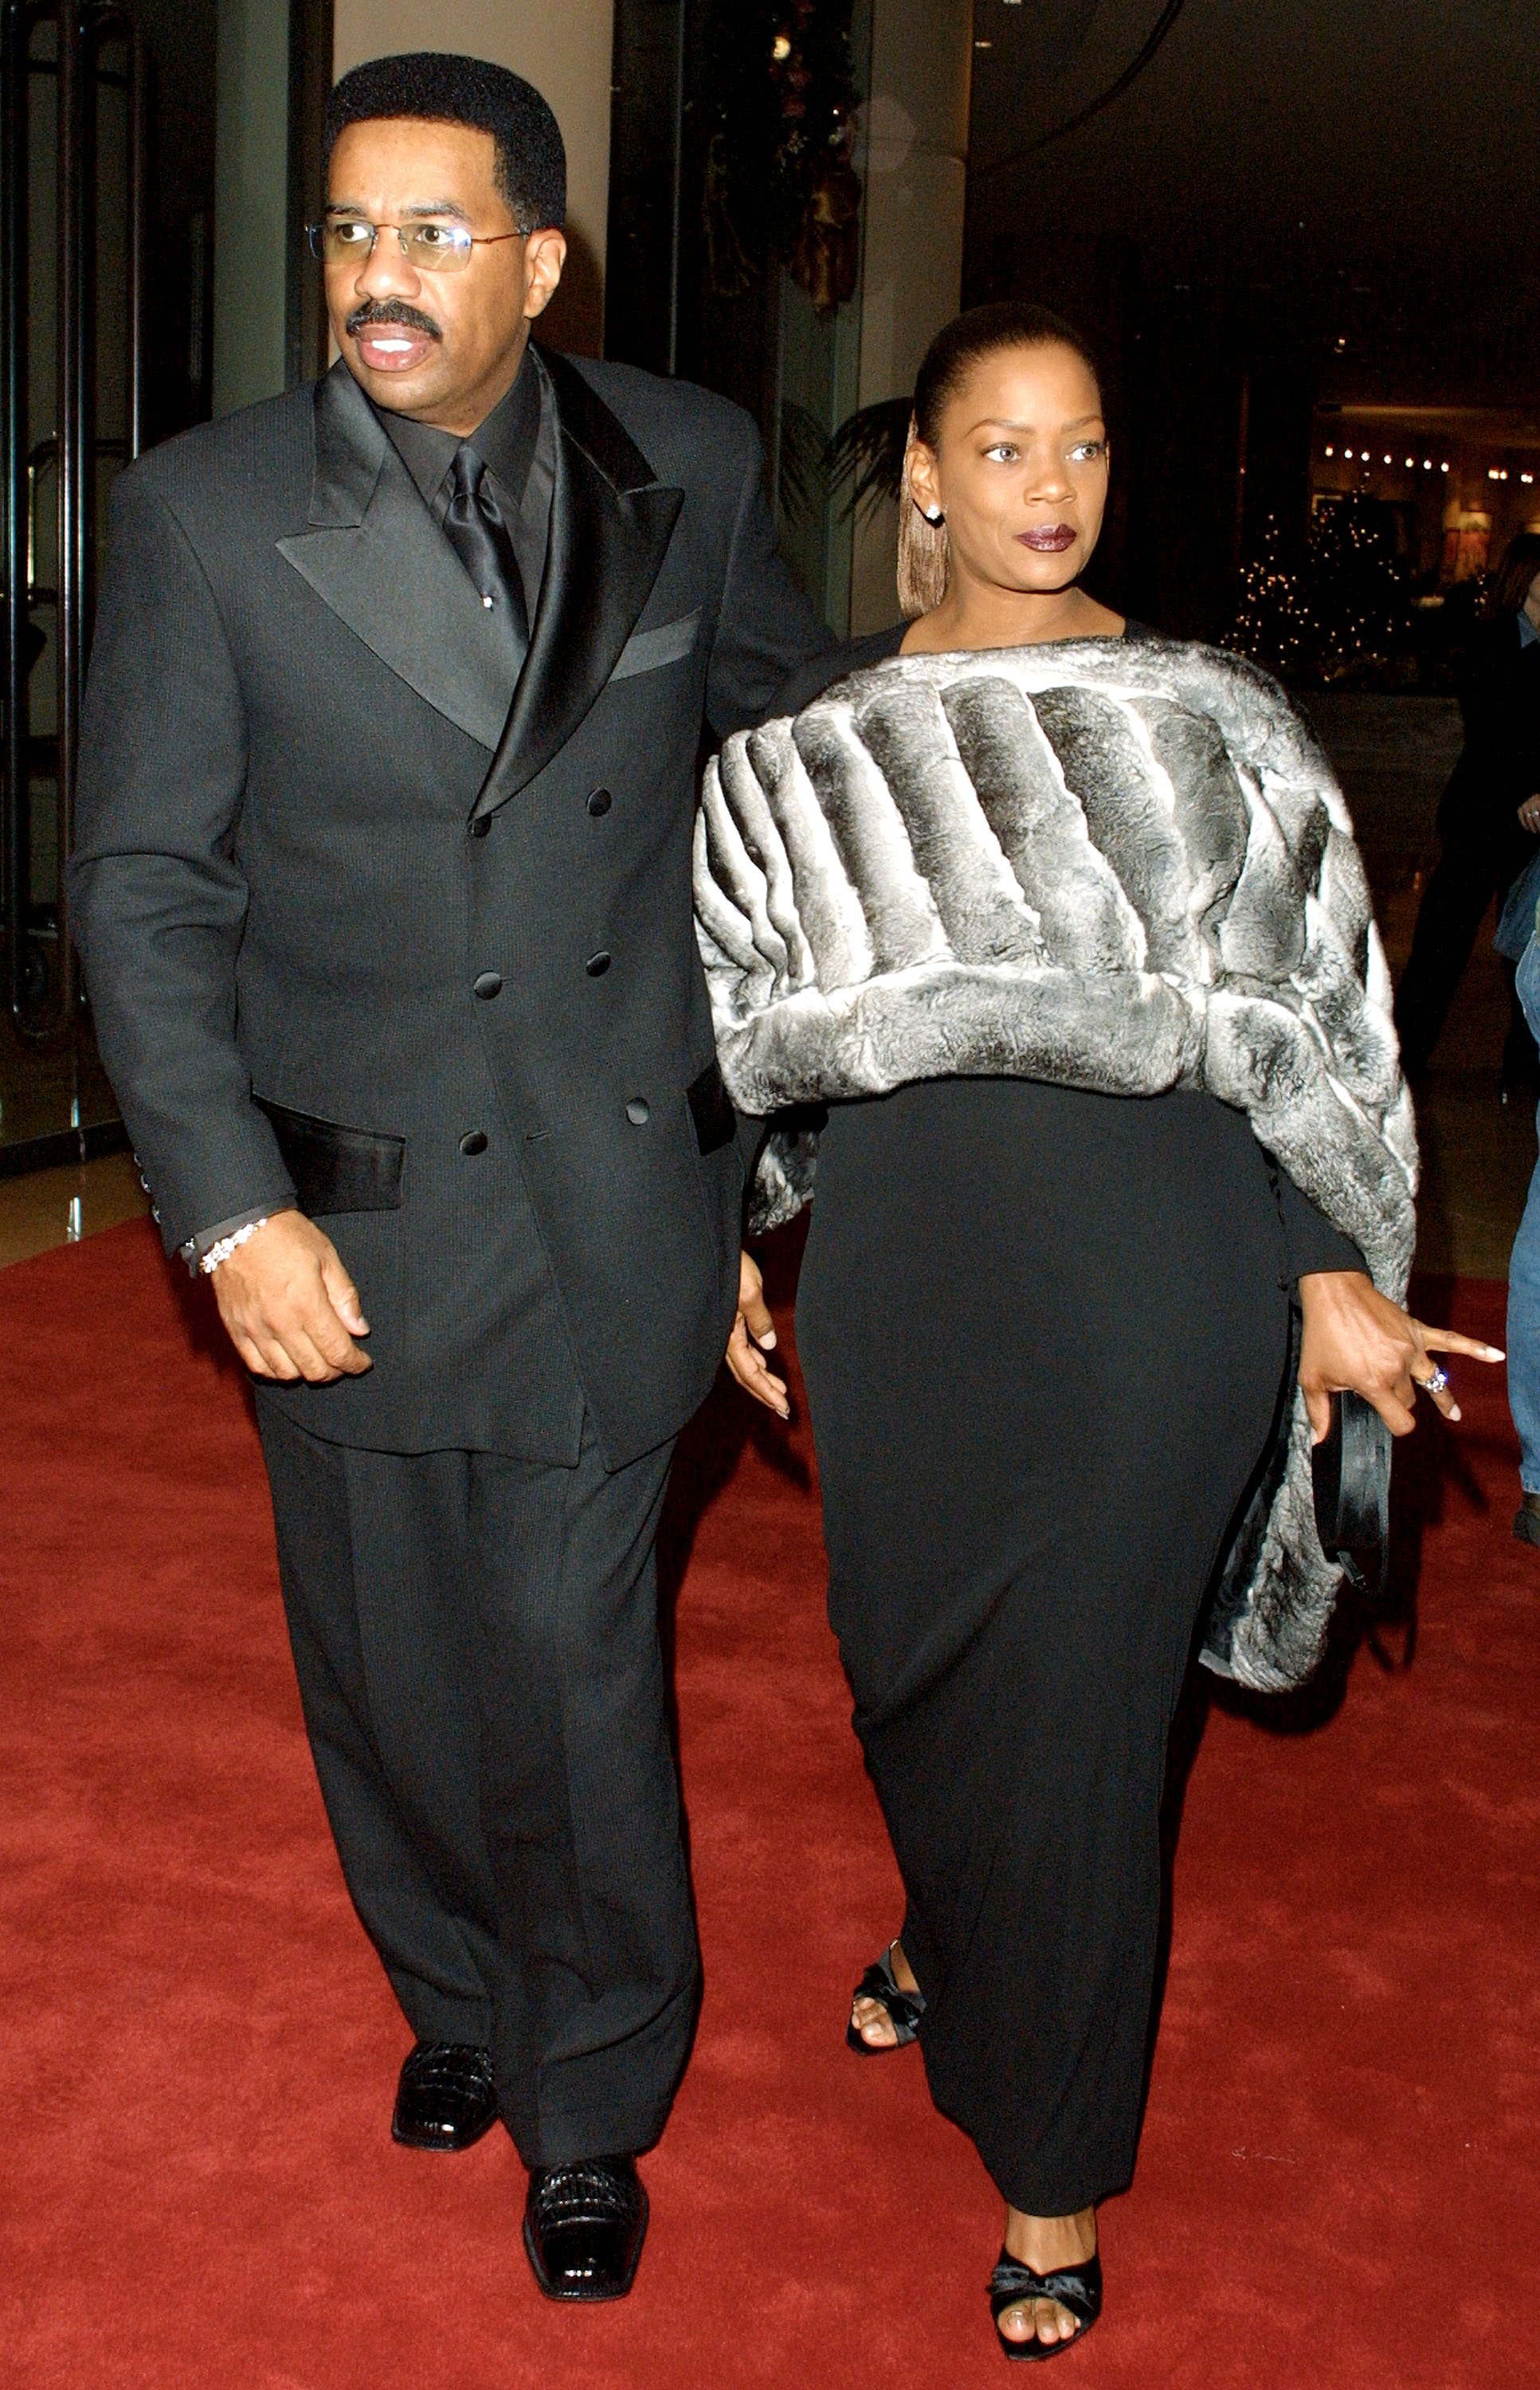 Steve Harvey and his wife Mary attend the Fourth Annual Rainbow/PUSH Coalition Awards Dinner on December 11, 2001, in Beverly Hills, CA. I Source: Getty Images